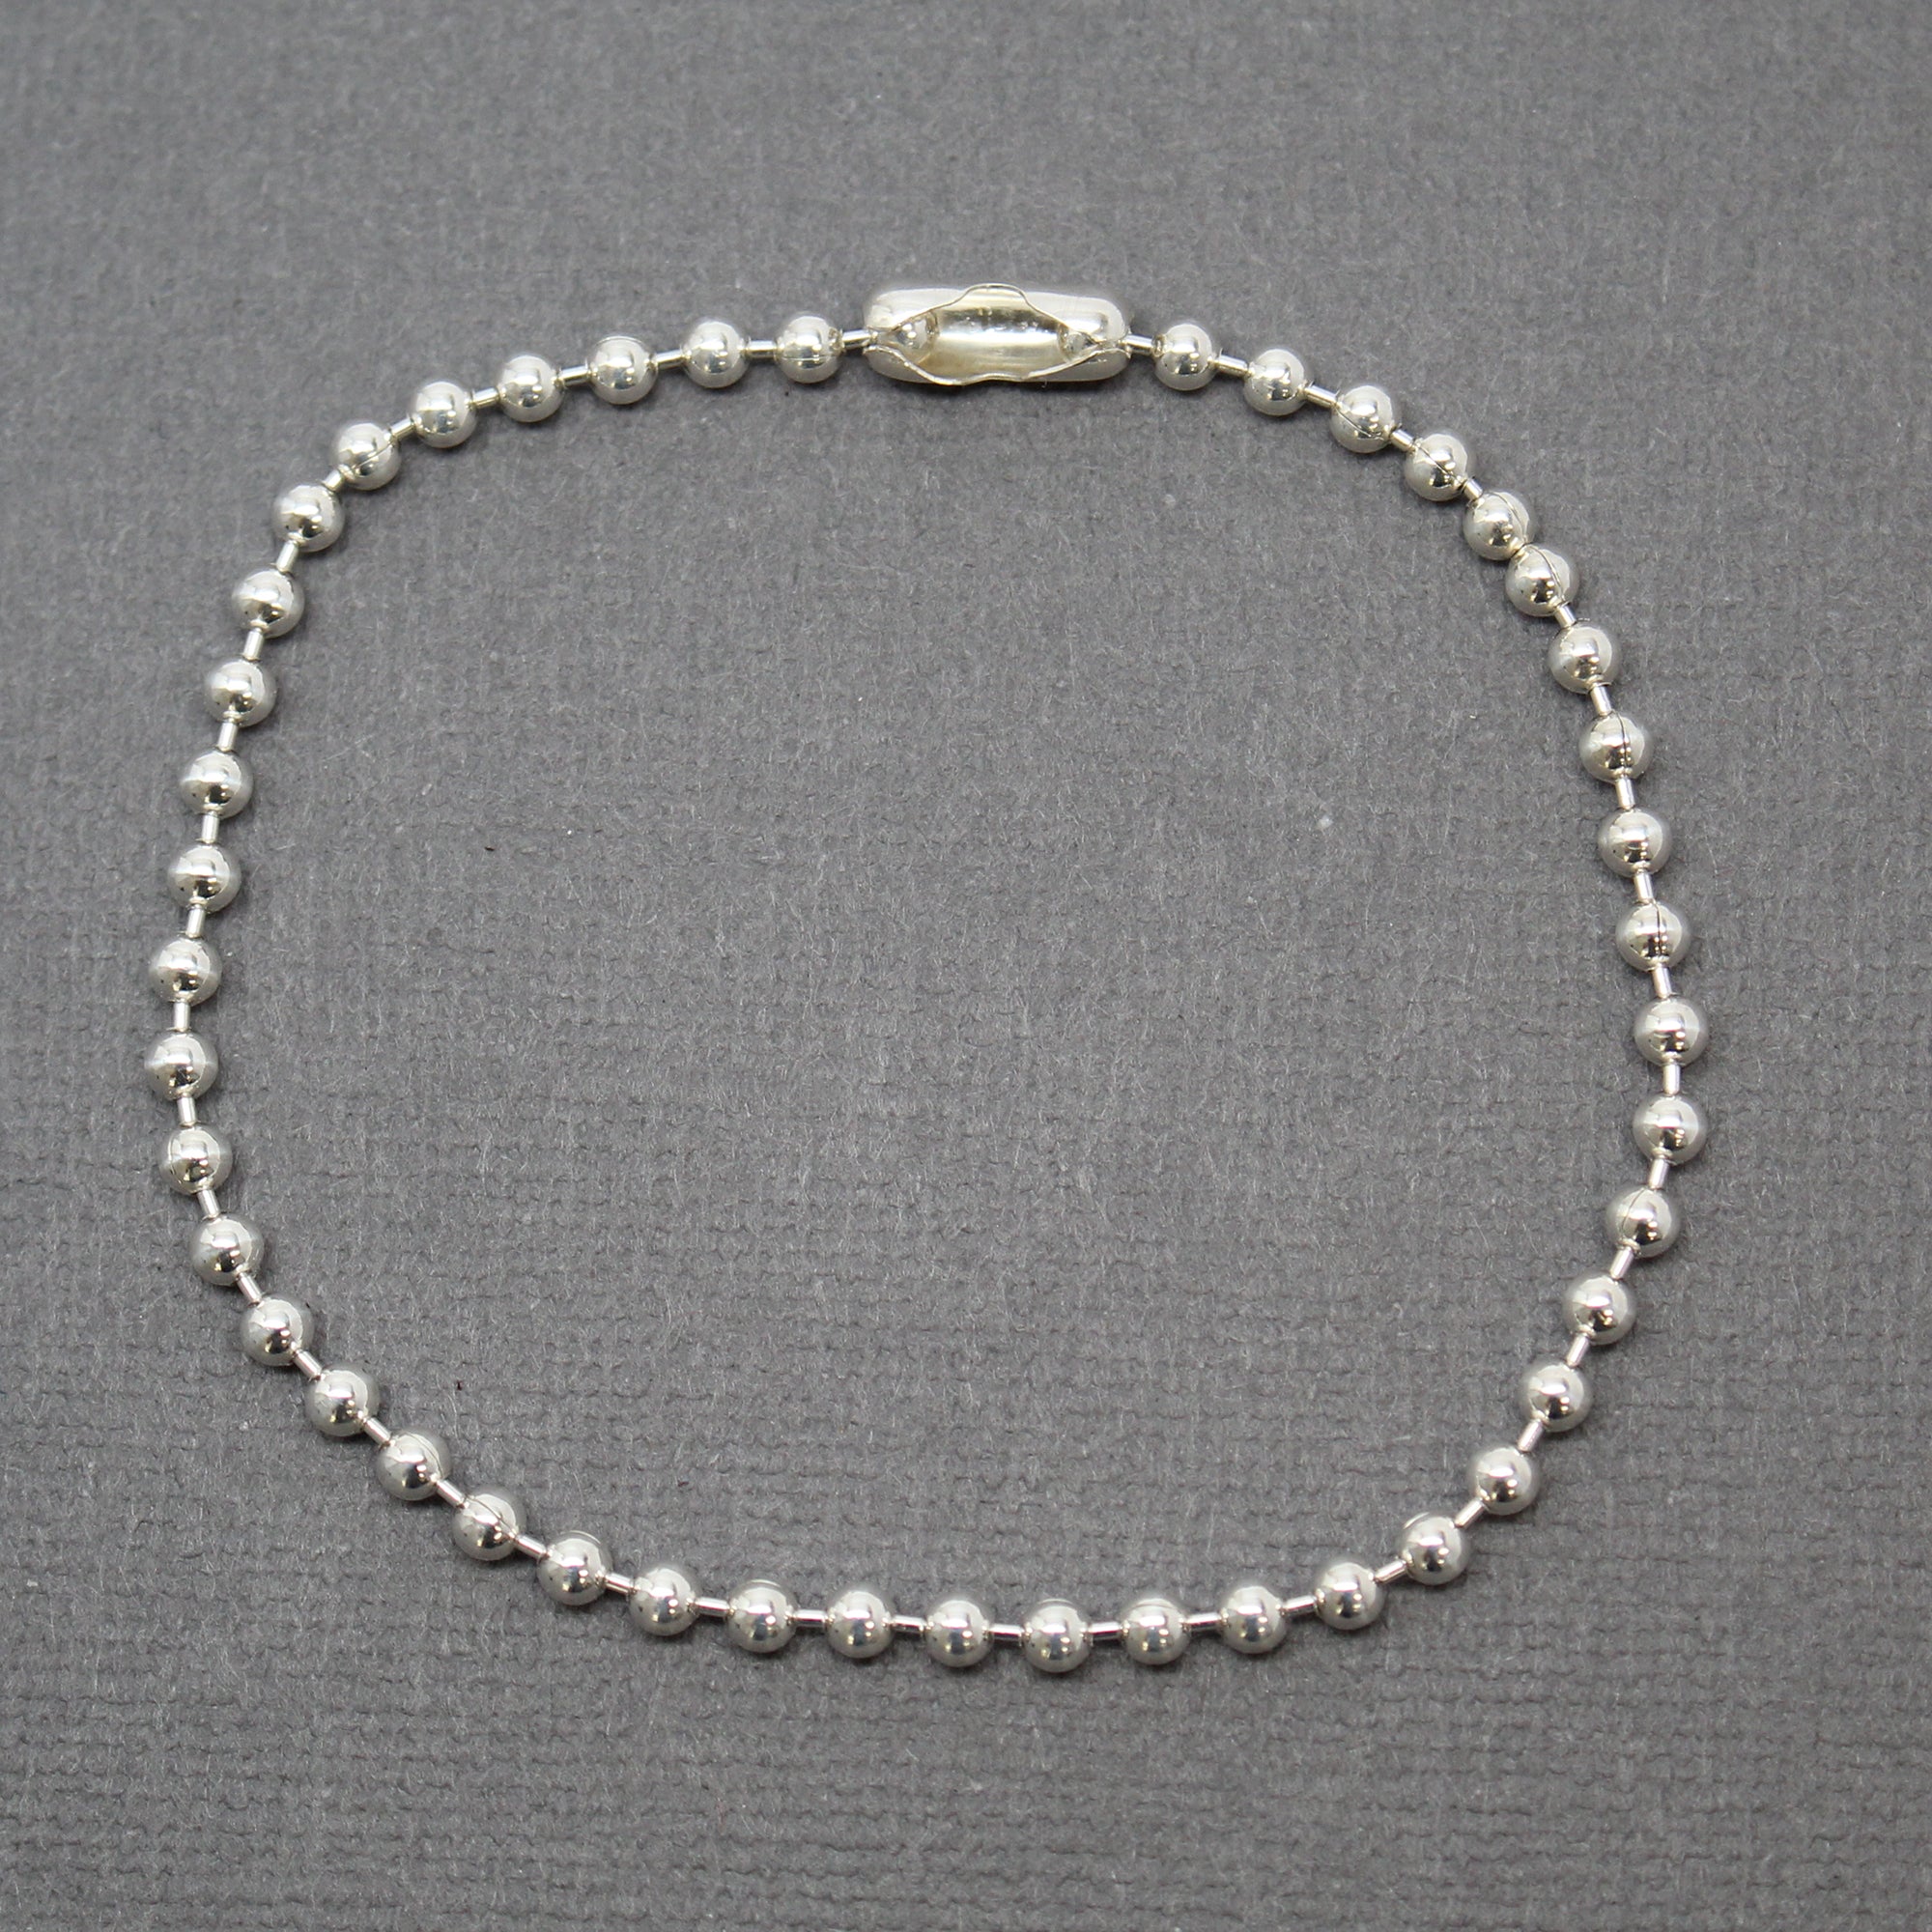 3mm Sterling Silver Bead Ball Chain Bracelet or Necklace – Kathy Bankston